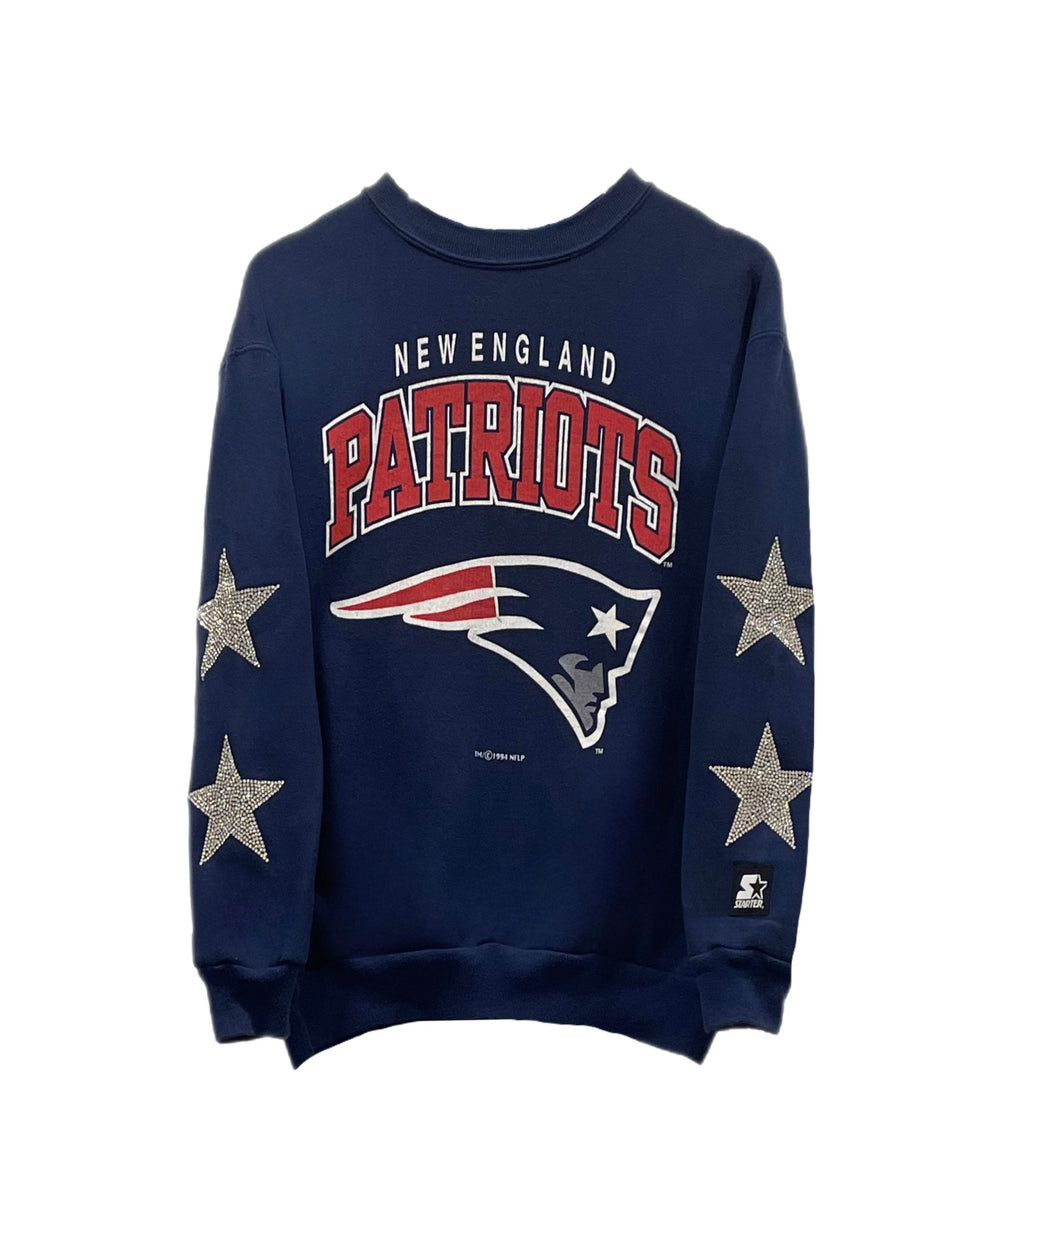 New England Patriots, Football One of a KIND Vintage Kids Sweatshirt with Crystal Star Design